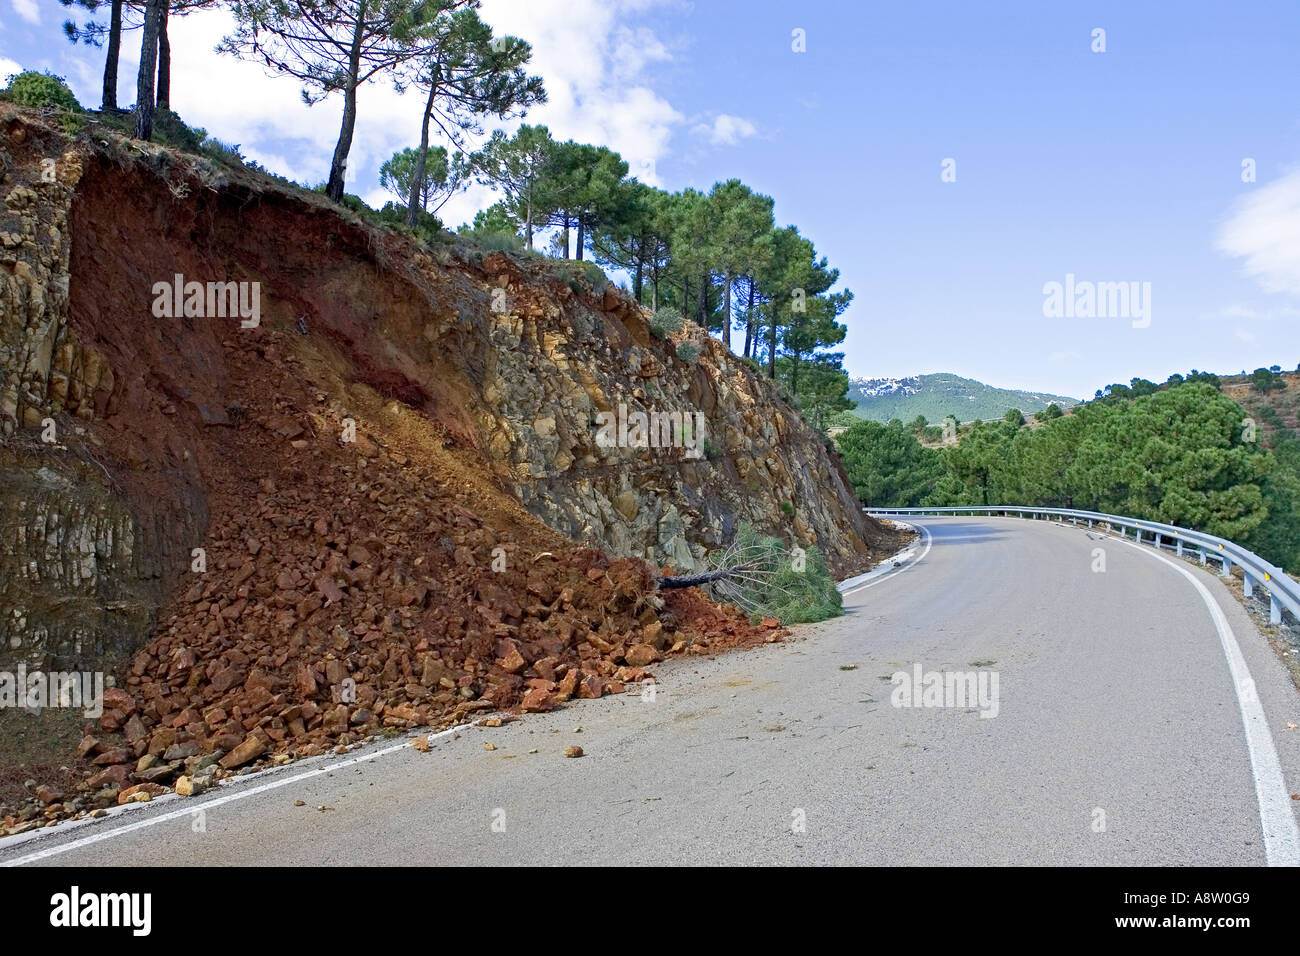 Land or mudslide on mountain road after heavy storm in Spain Stock Photo